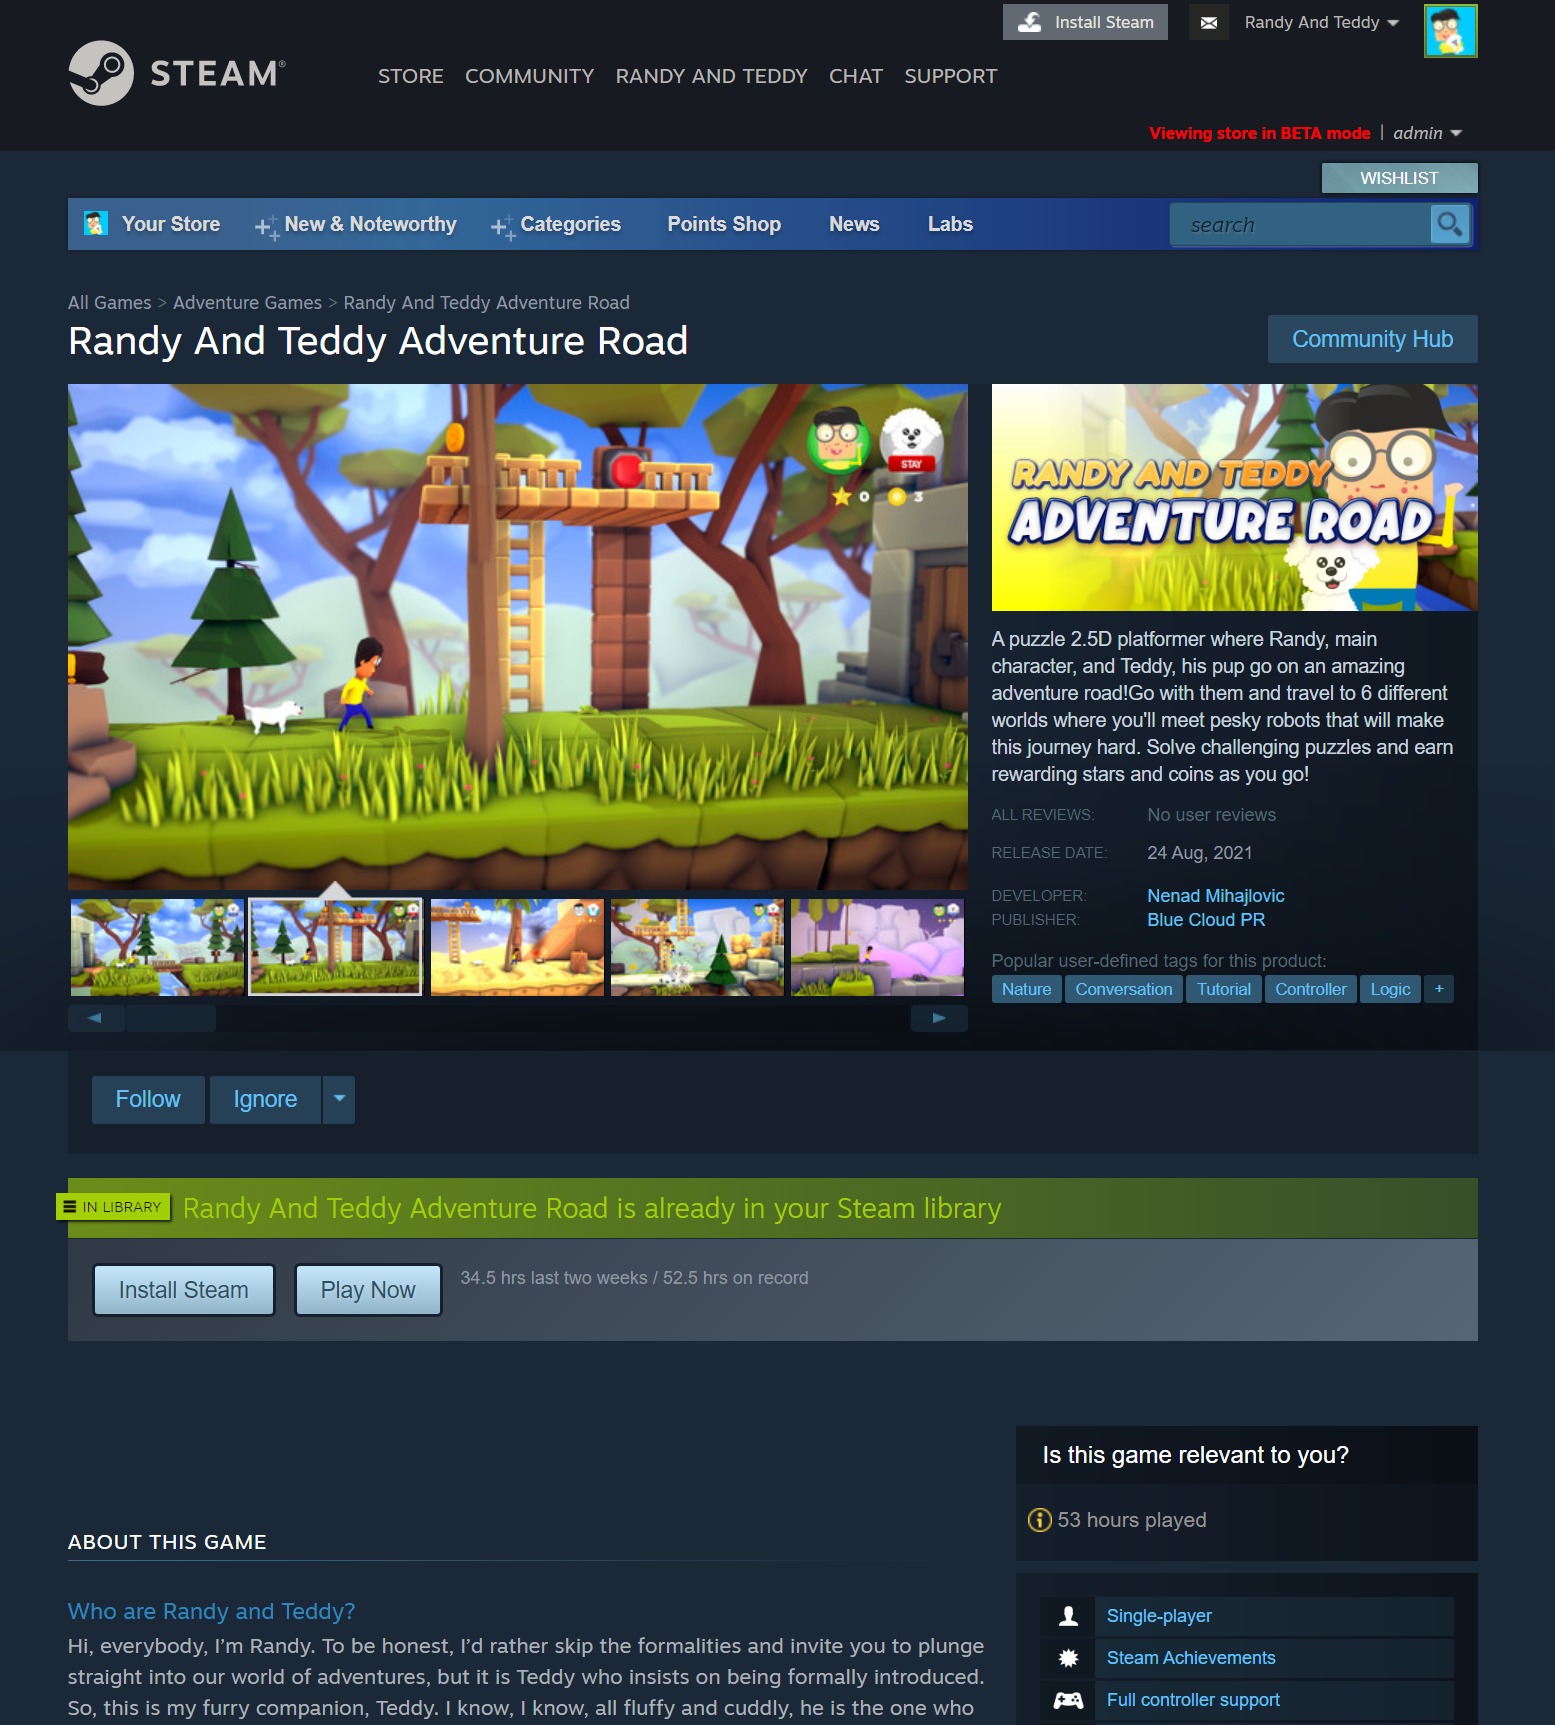 Randy and Teddy: Adventure Road Steam Page Wishlist